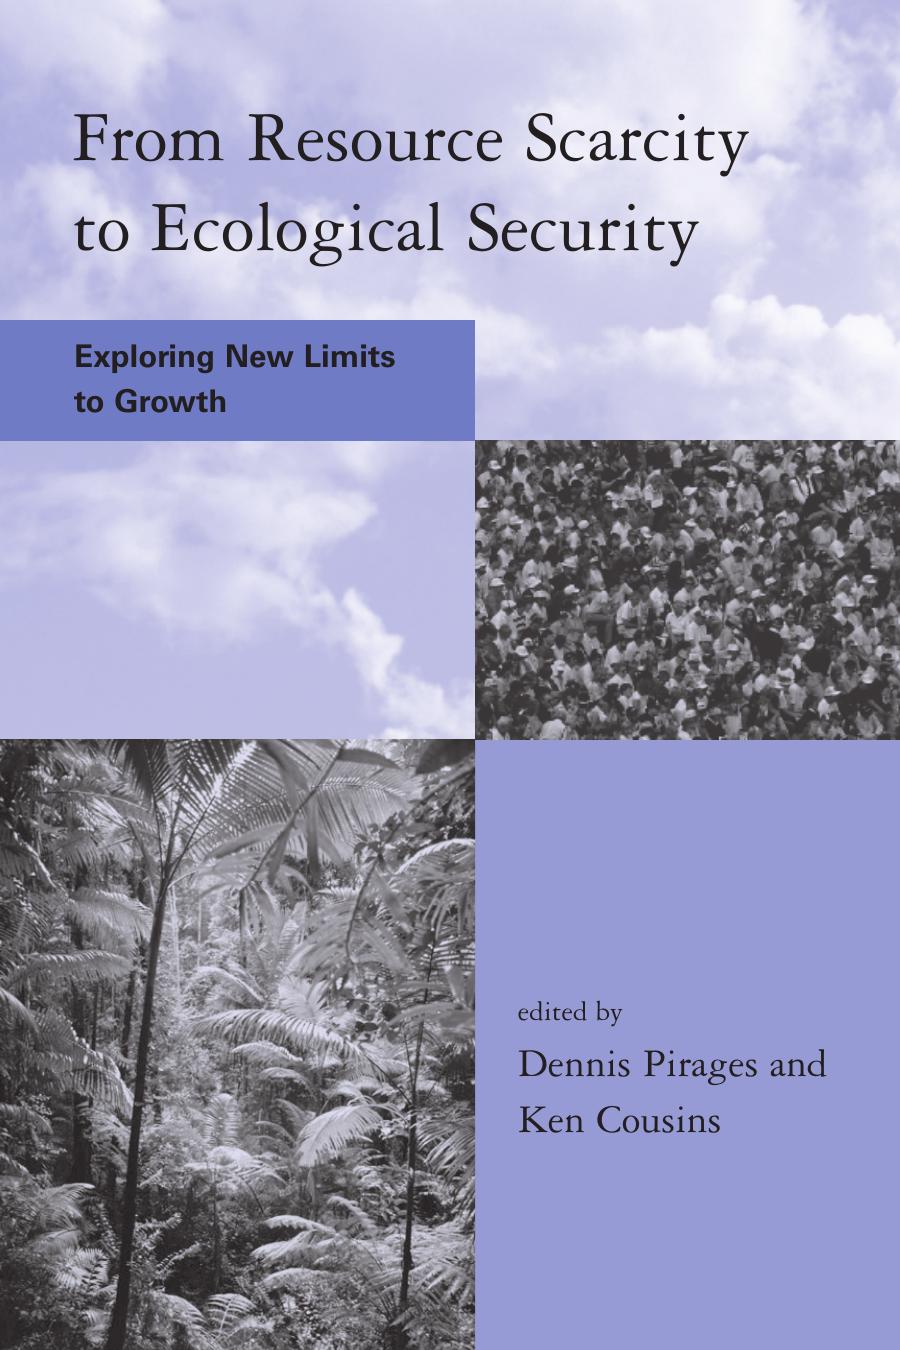 From Resource Scarcity to Ecological Security: Exploring New Limits to Growth